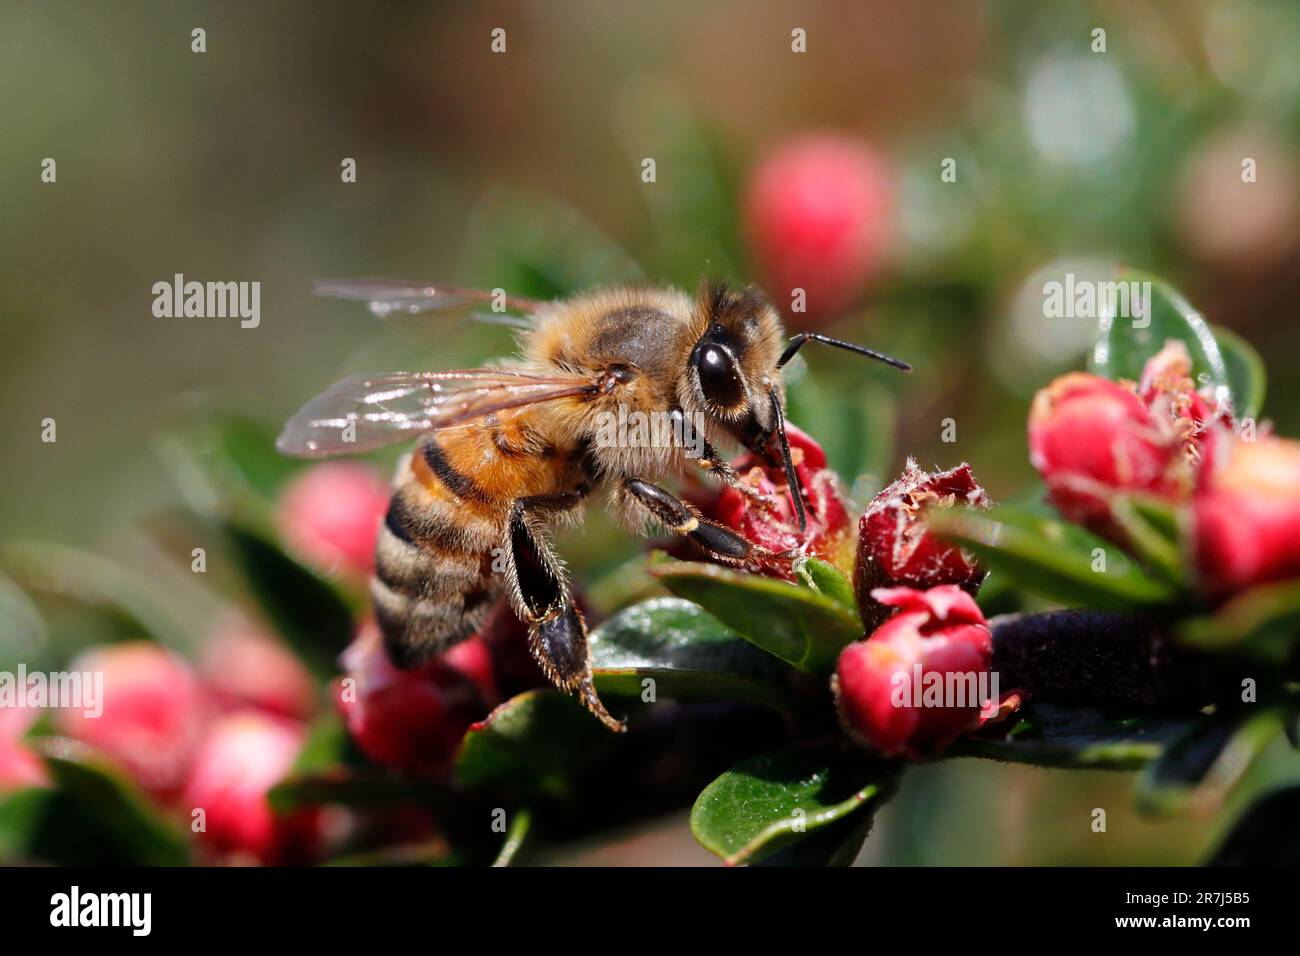 HONEY BEE (Apis mellifera) feeding on the red flower buds of Cotoneaster horizontalis in a suburban garden, UK. Stock Photo